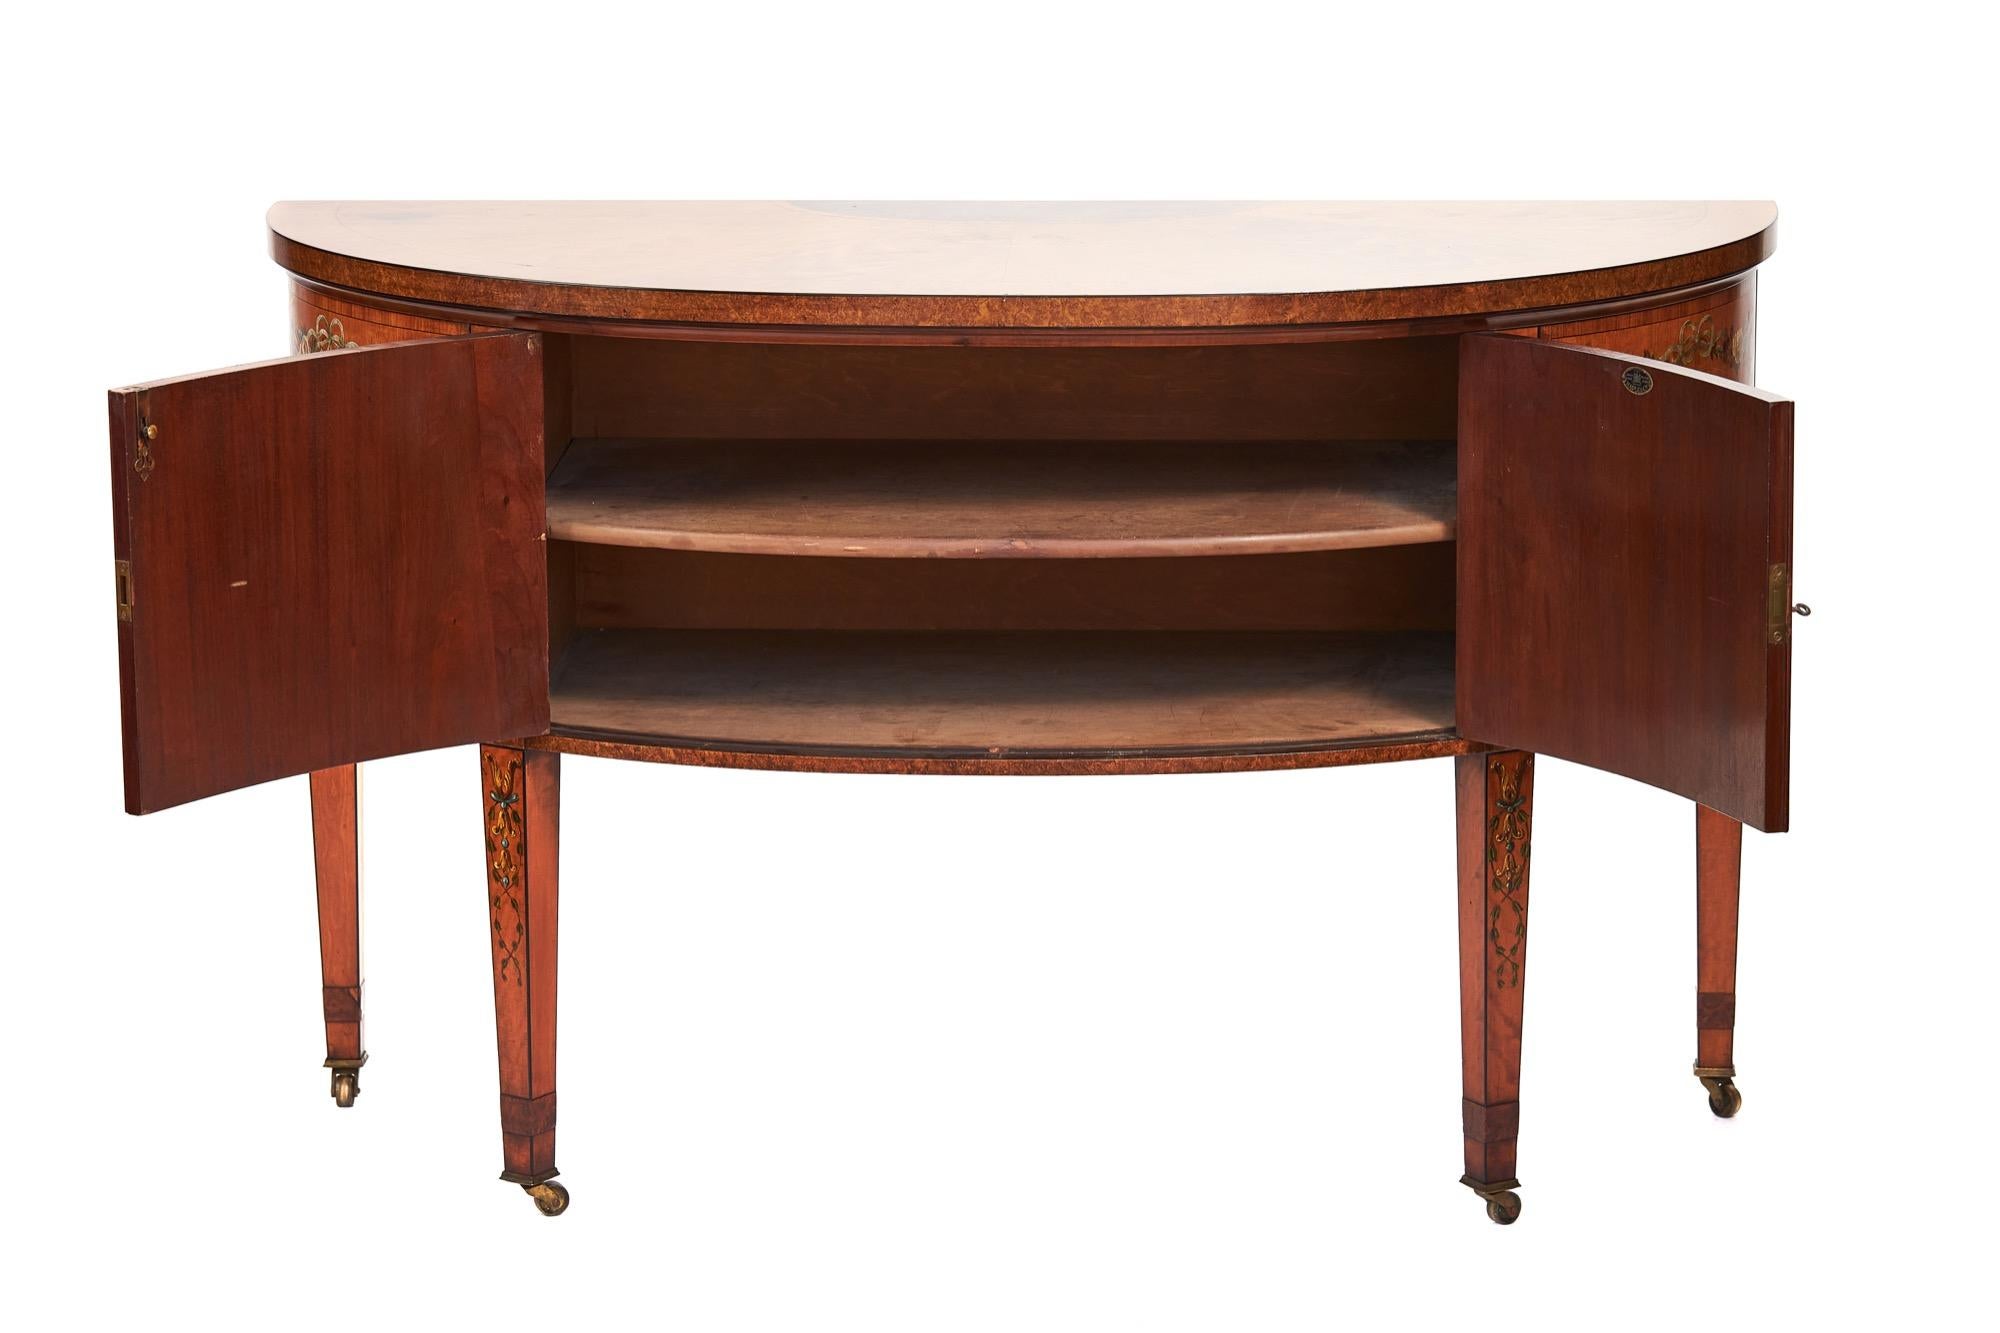 Fine Satinwood inlaid & Painted 2 door Demi Lune Commode by Maple & Co
circa 1900
Segmented Satinwood , Burr Walnut & Tulip banding Sunburst top with cross banding,
Two door cupboard base , open to reveal single shelf interior,
sitting on 4 tapering